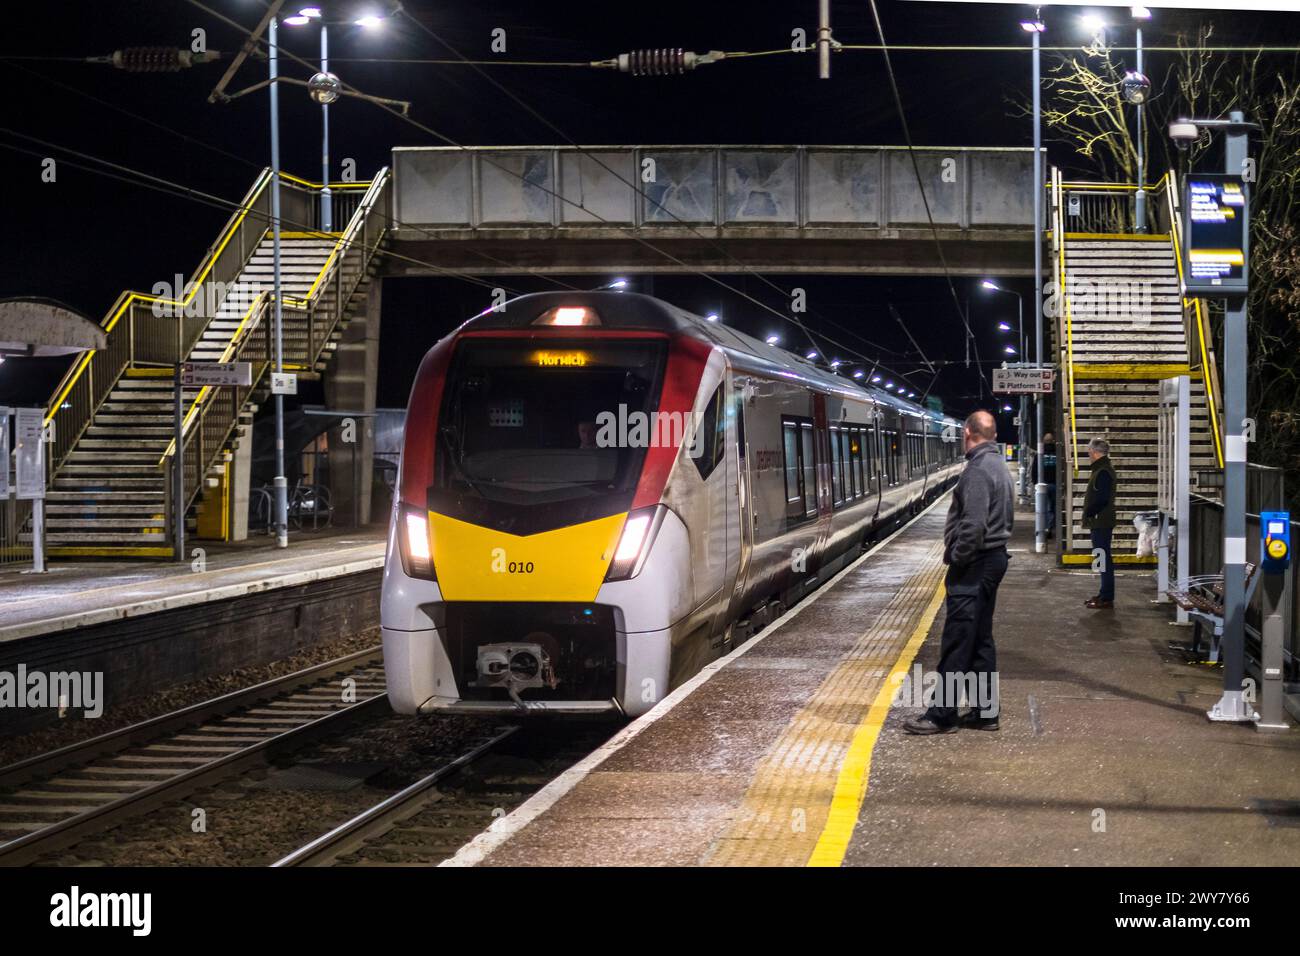 Greater Anglia train arriving at Diss, Norfolk railway station. London train going to Norwich. Stock Photo